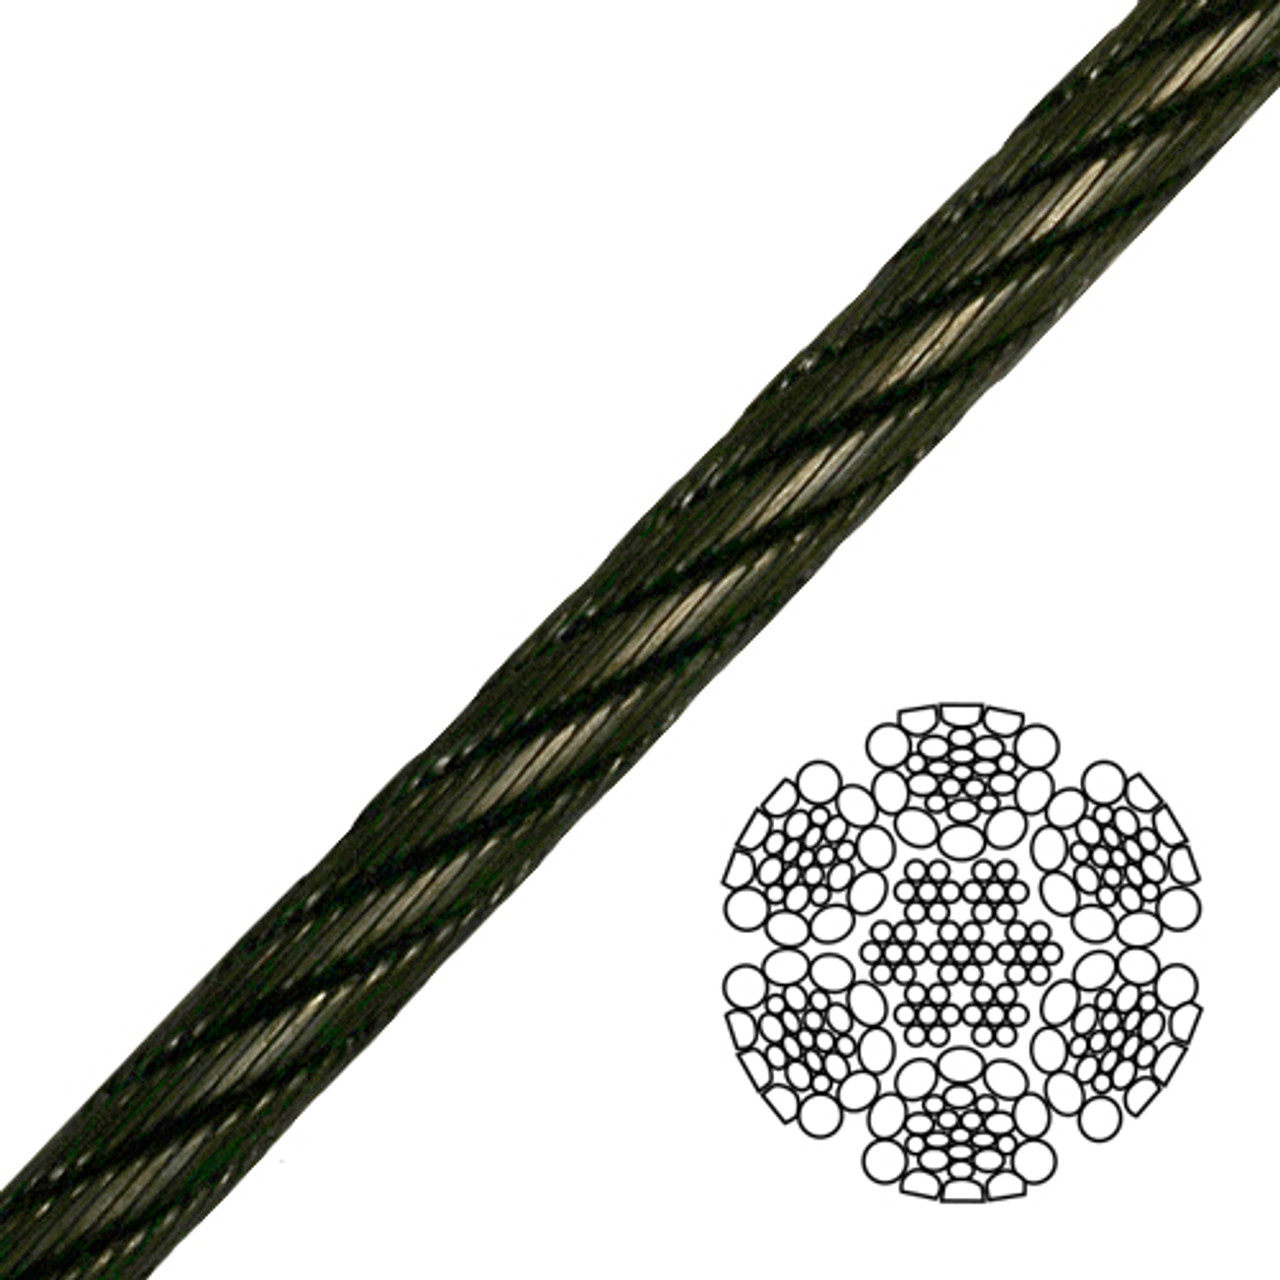 BUBBA Extendable Net, Large with Corrosion Resistant Construction